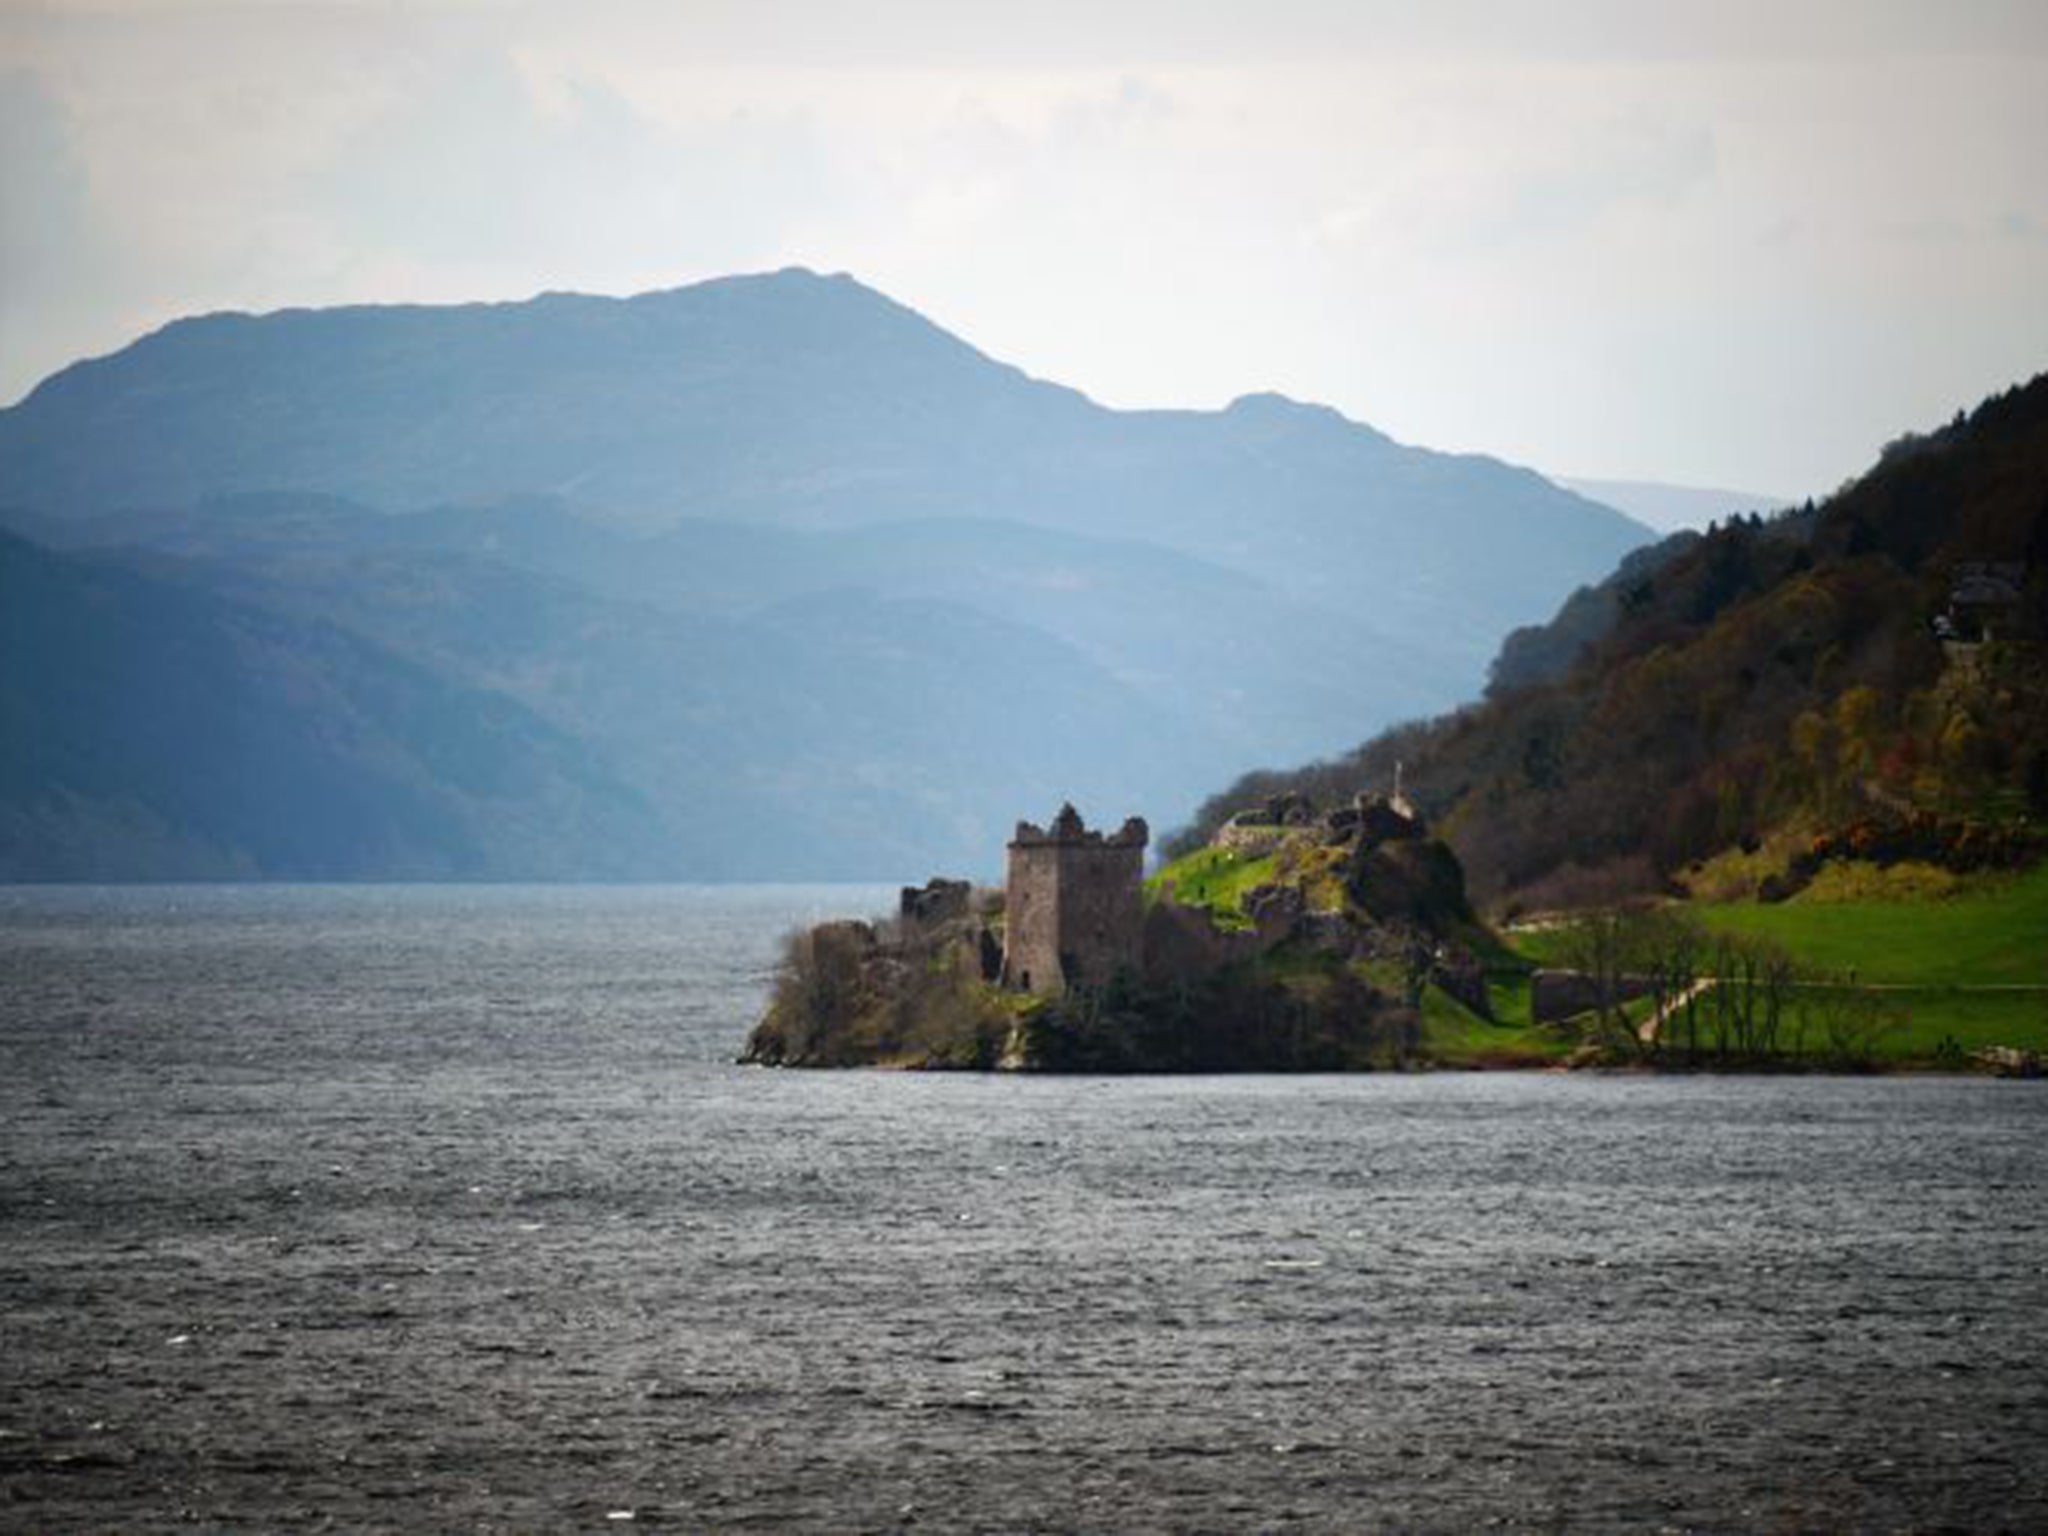 Loch Ness has been put at the heart of a £2m promotional drive launched by Visit Britain